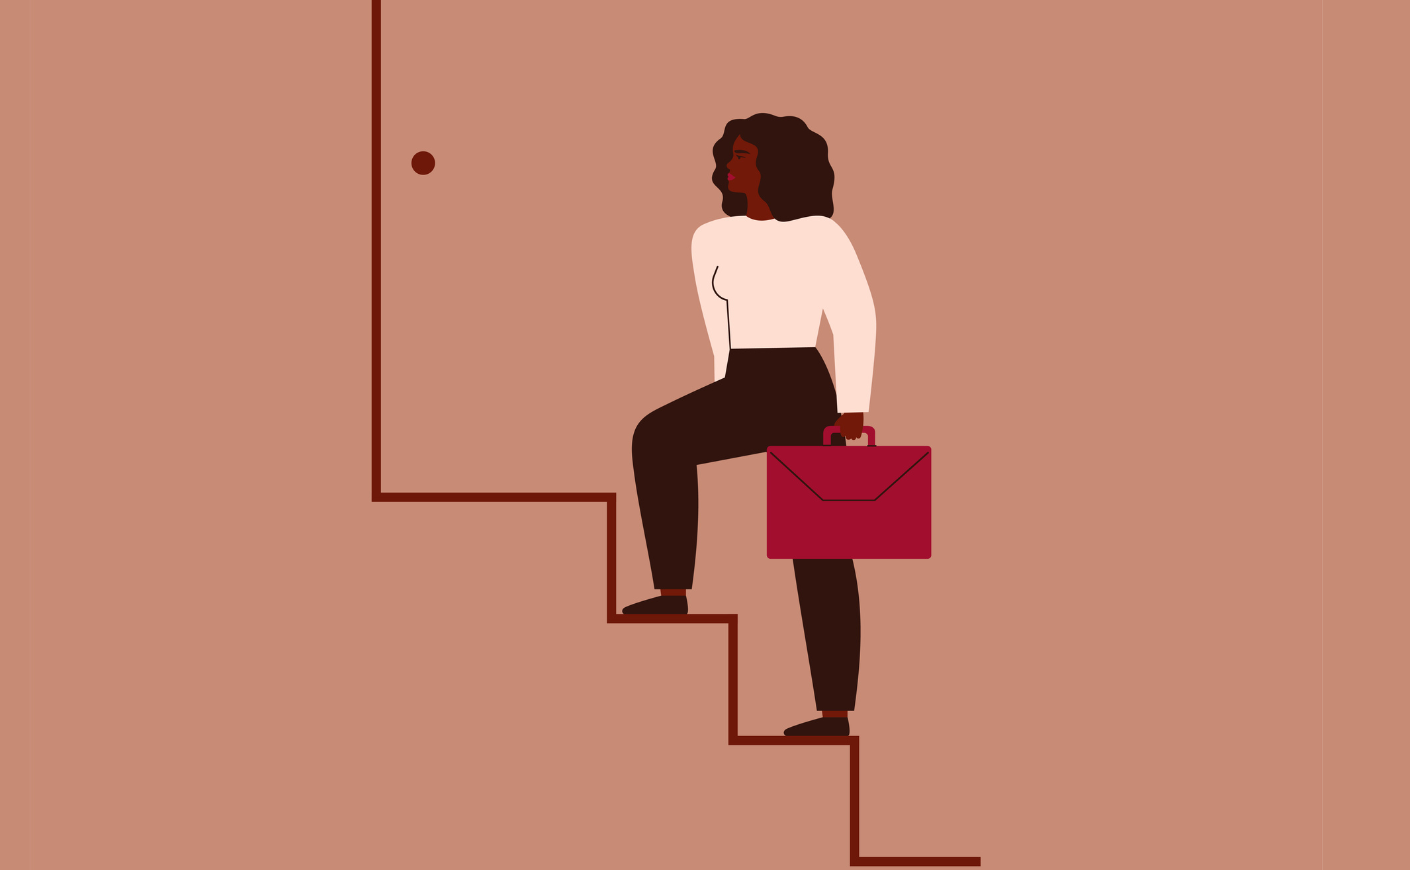 illustration of a black woman carrying a briefcase walking up stairs toward a door